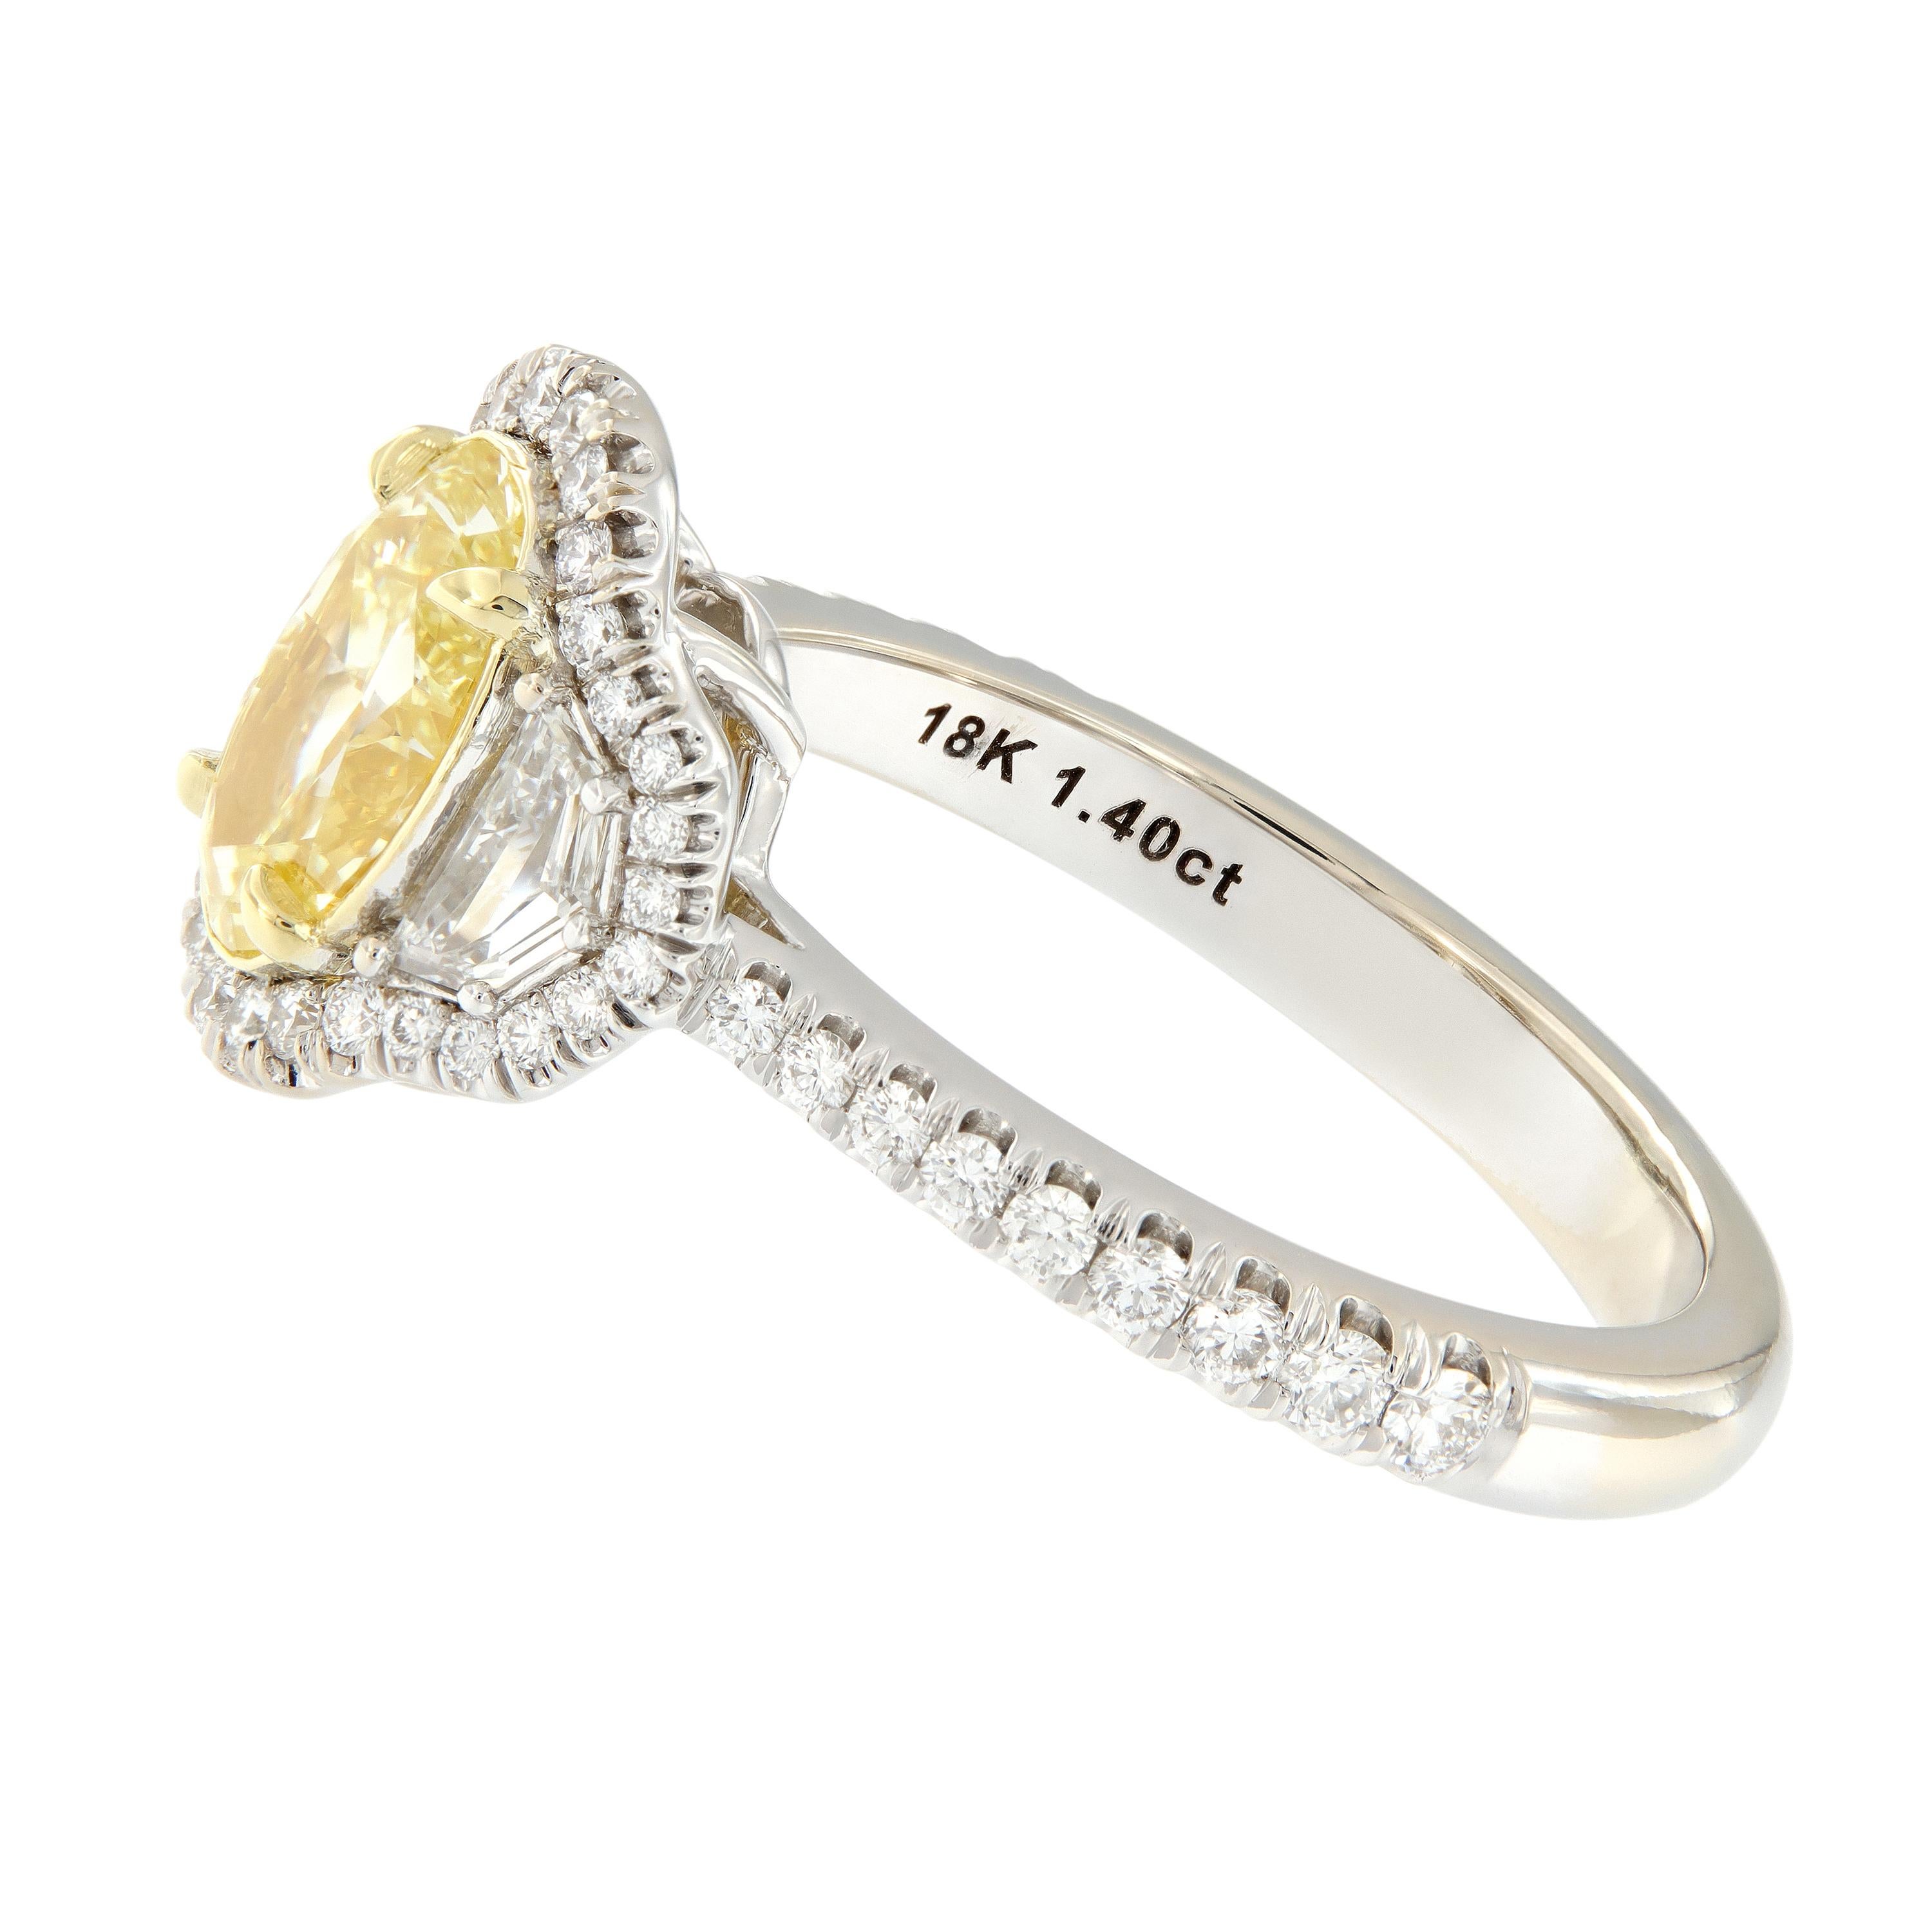 This pretty 18k white and yellow gold engagement ring features a stunning fancy yellow oval shaped diamond and is accented by Cadillac shaped step cut side diamonds. Pave set in a halo around the three center stones, in the side gallery and down the